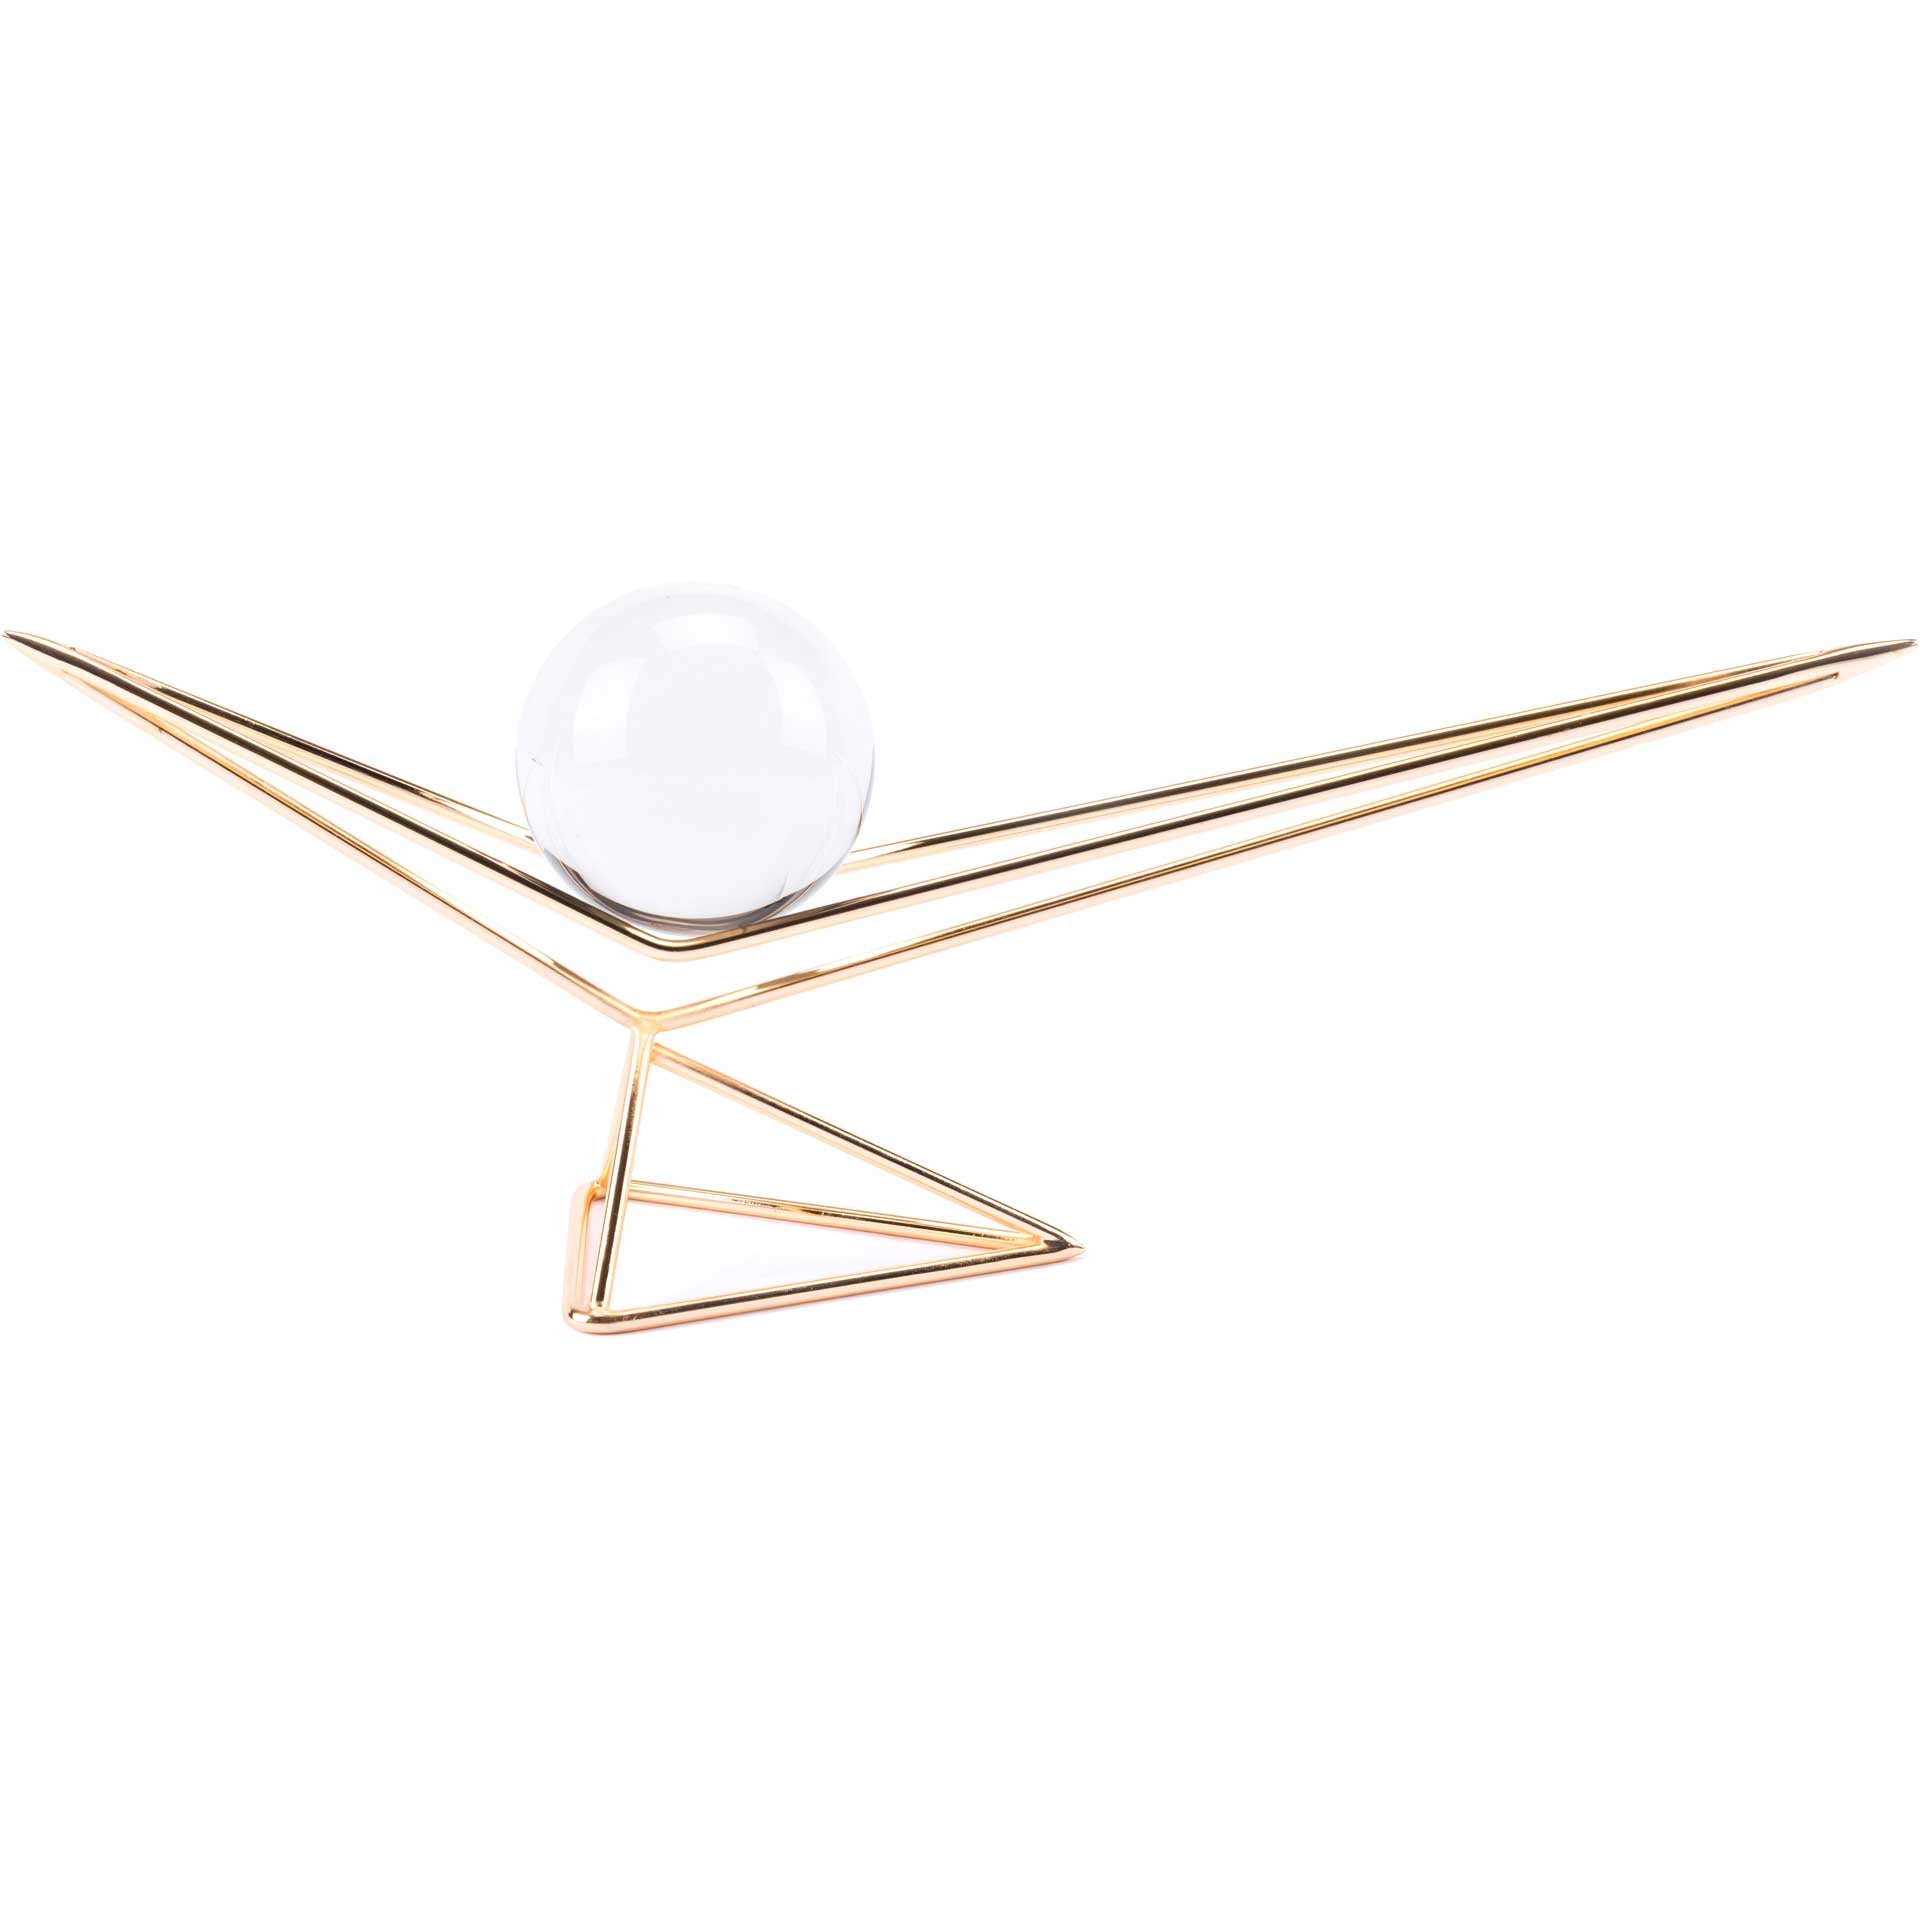 Origami Orb Gold